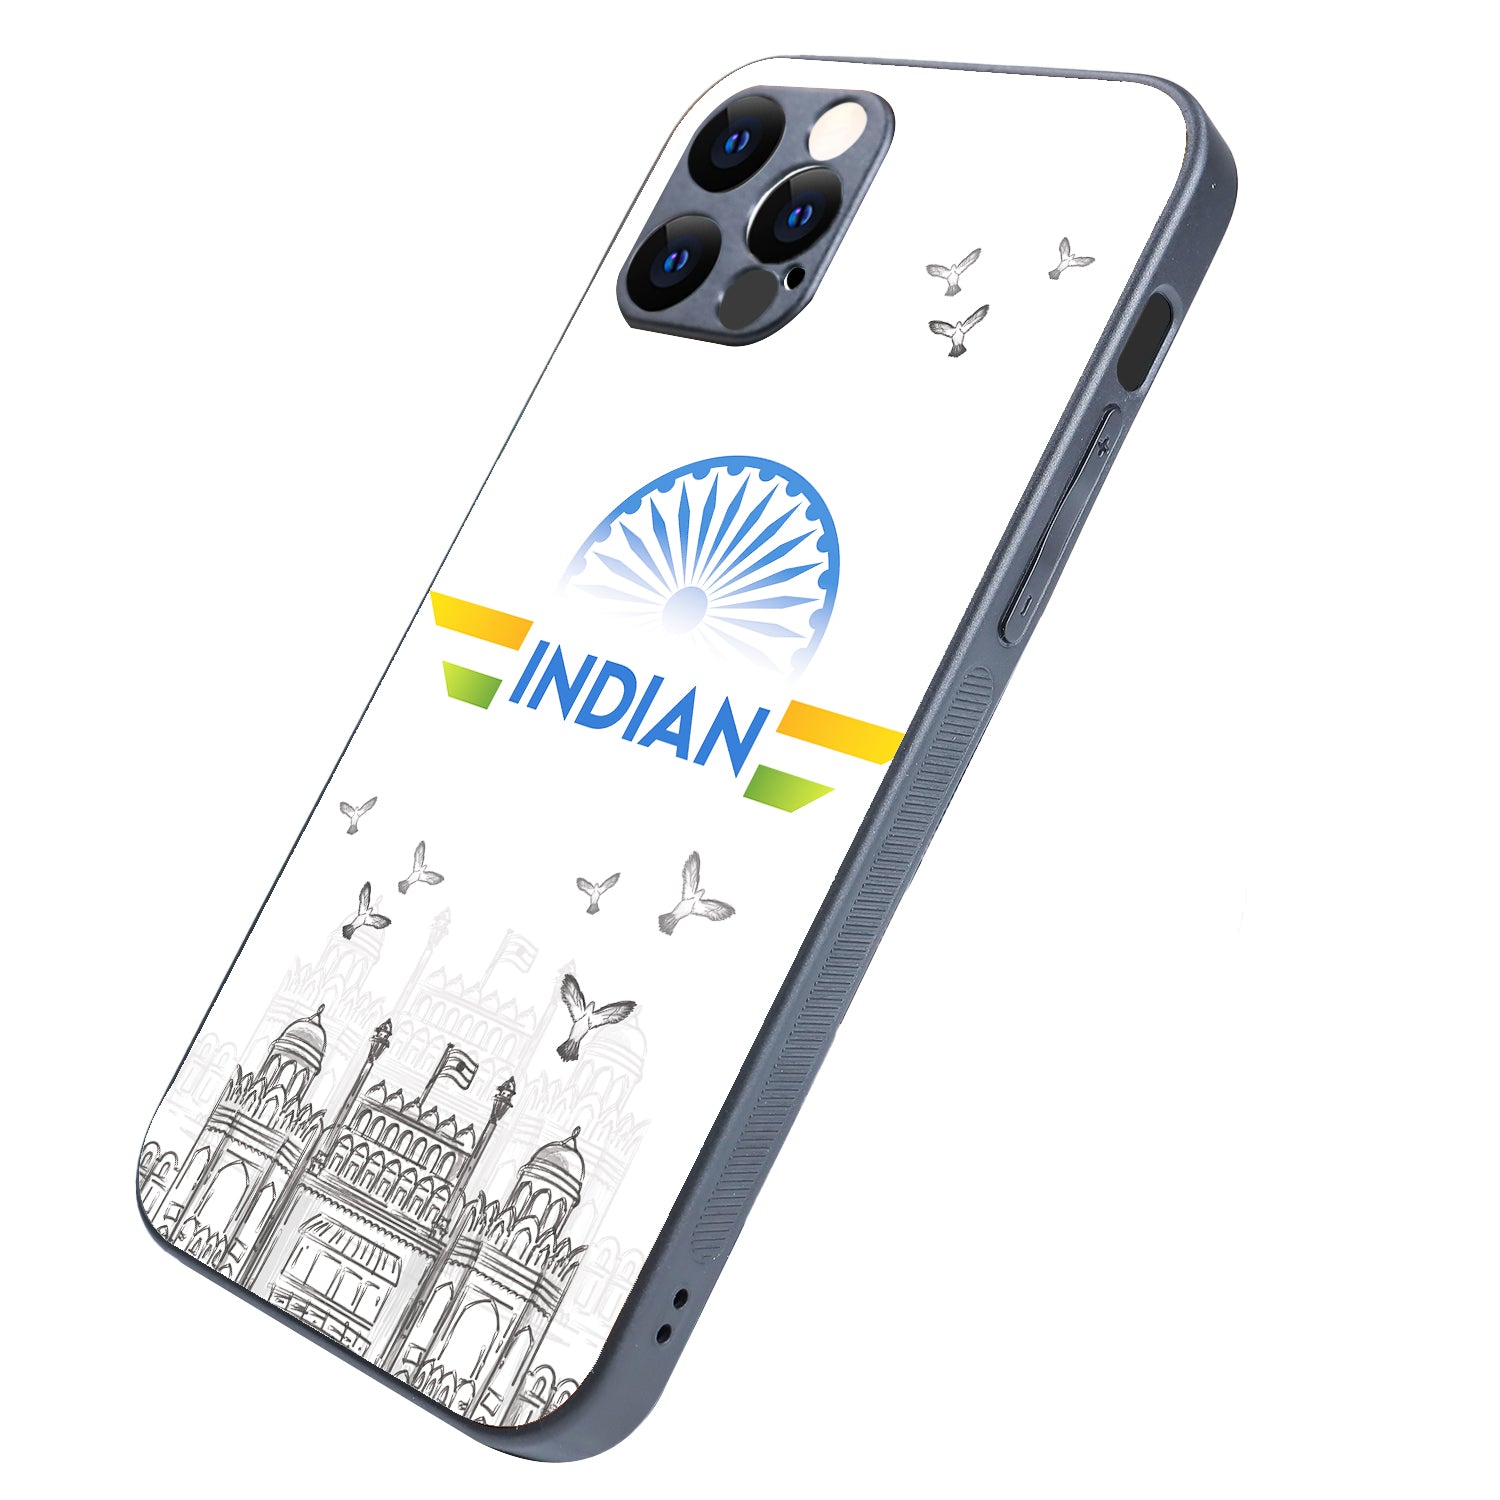 Indian iPhone 12 Pro Case